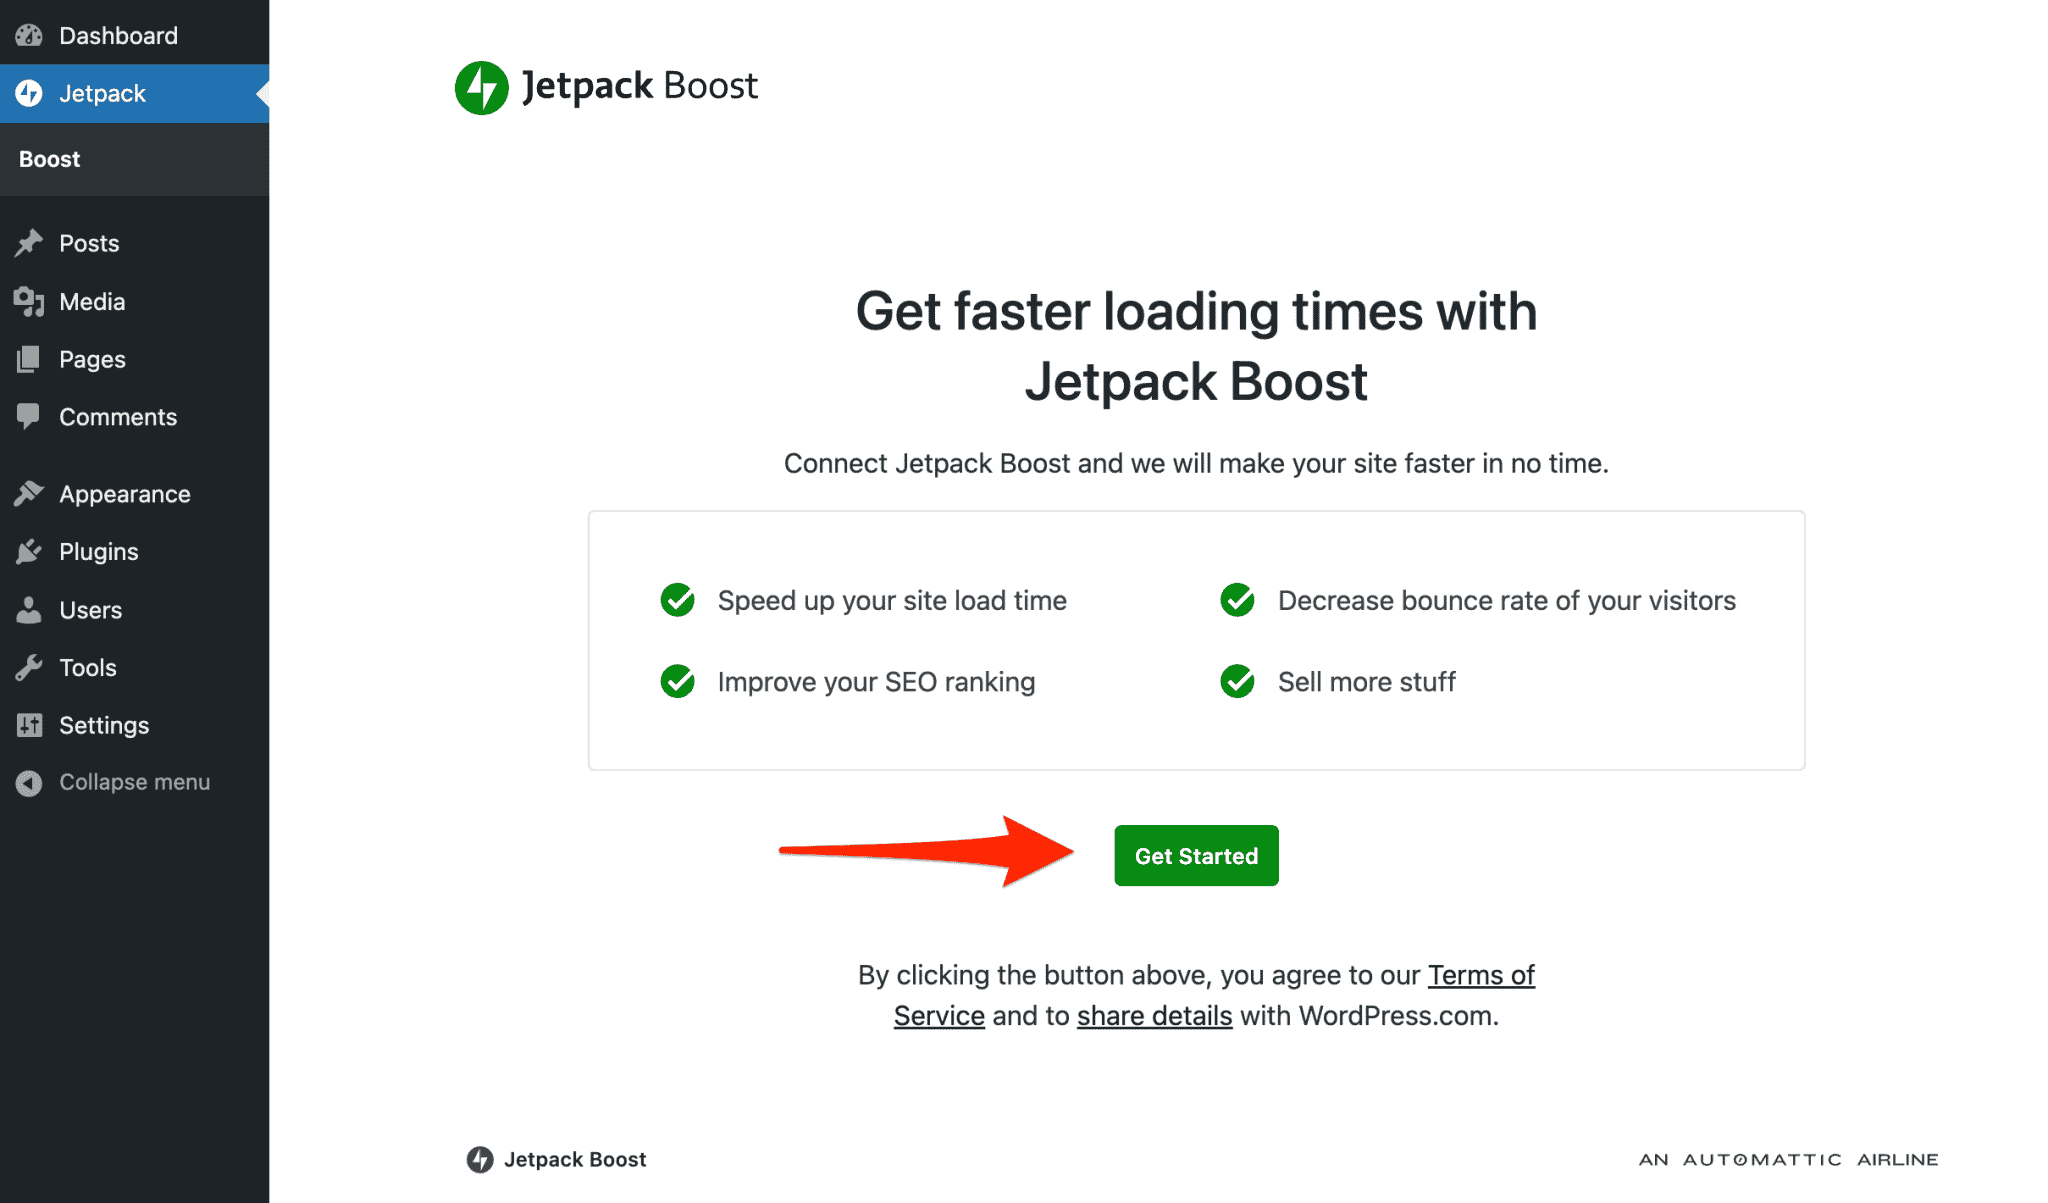 Get started with Jetpack Boost.